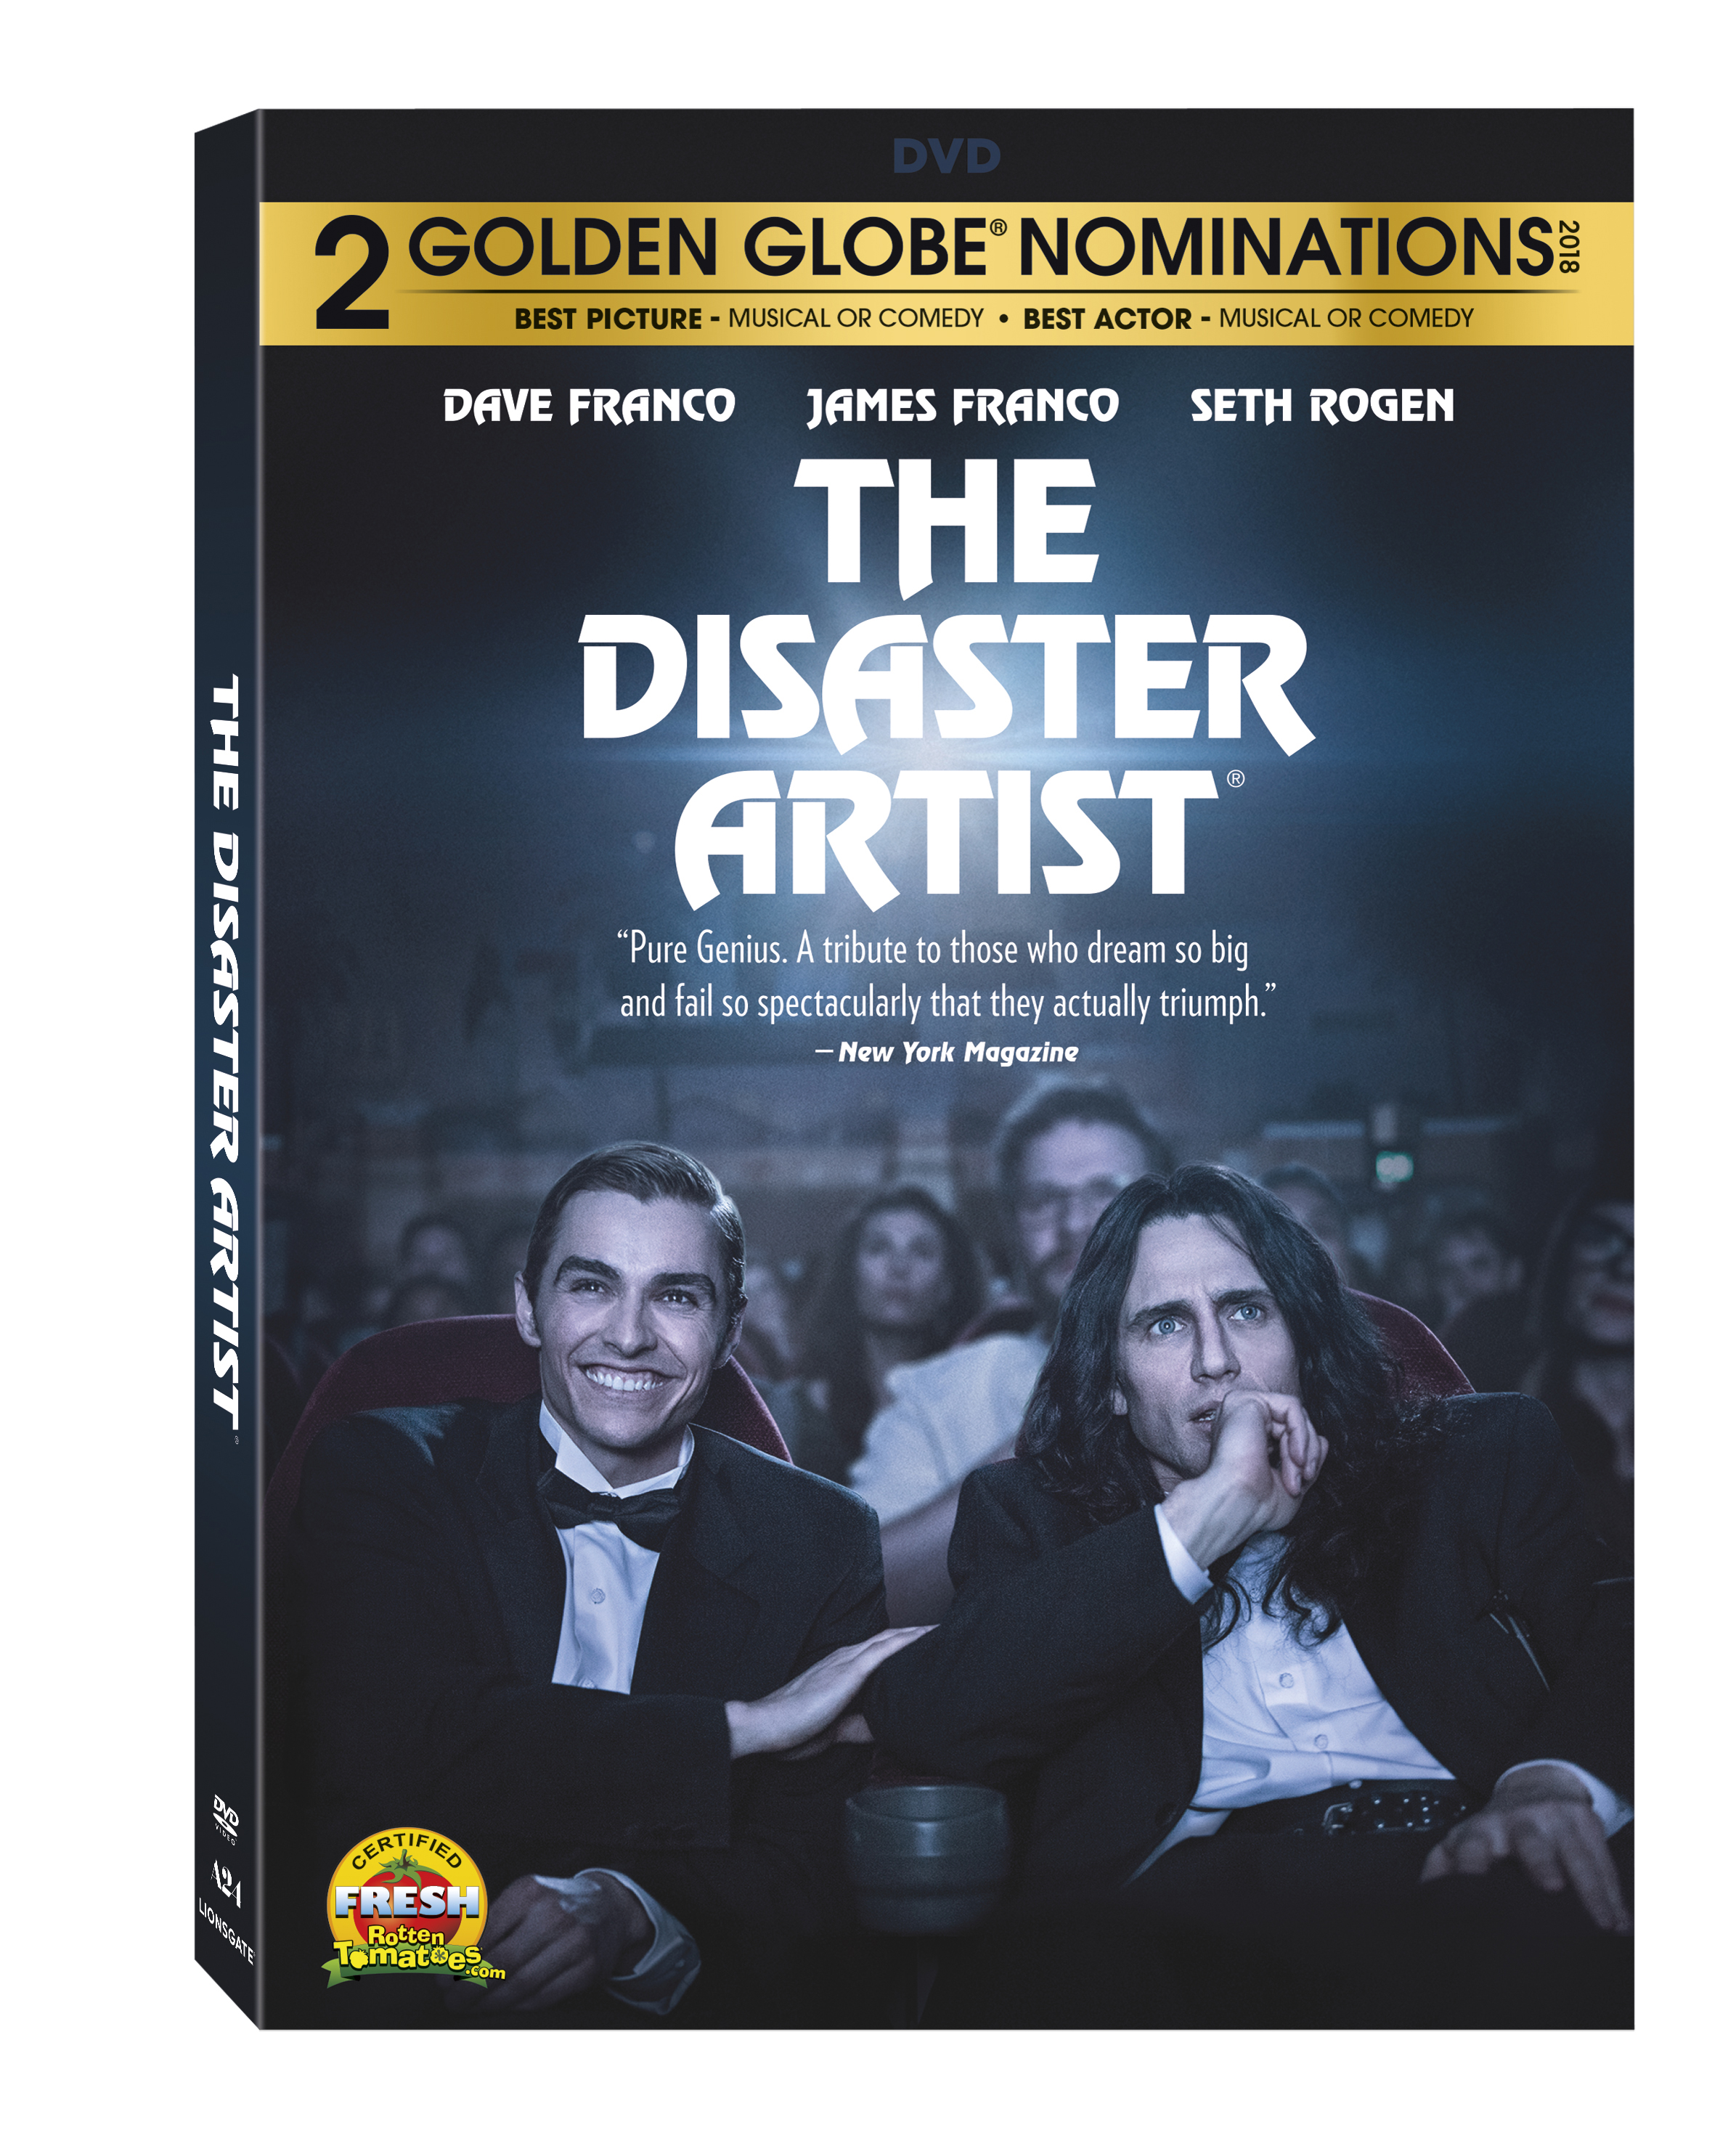 The Disaster Artist DVD cover (Lionsgate Home Entertainment)